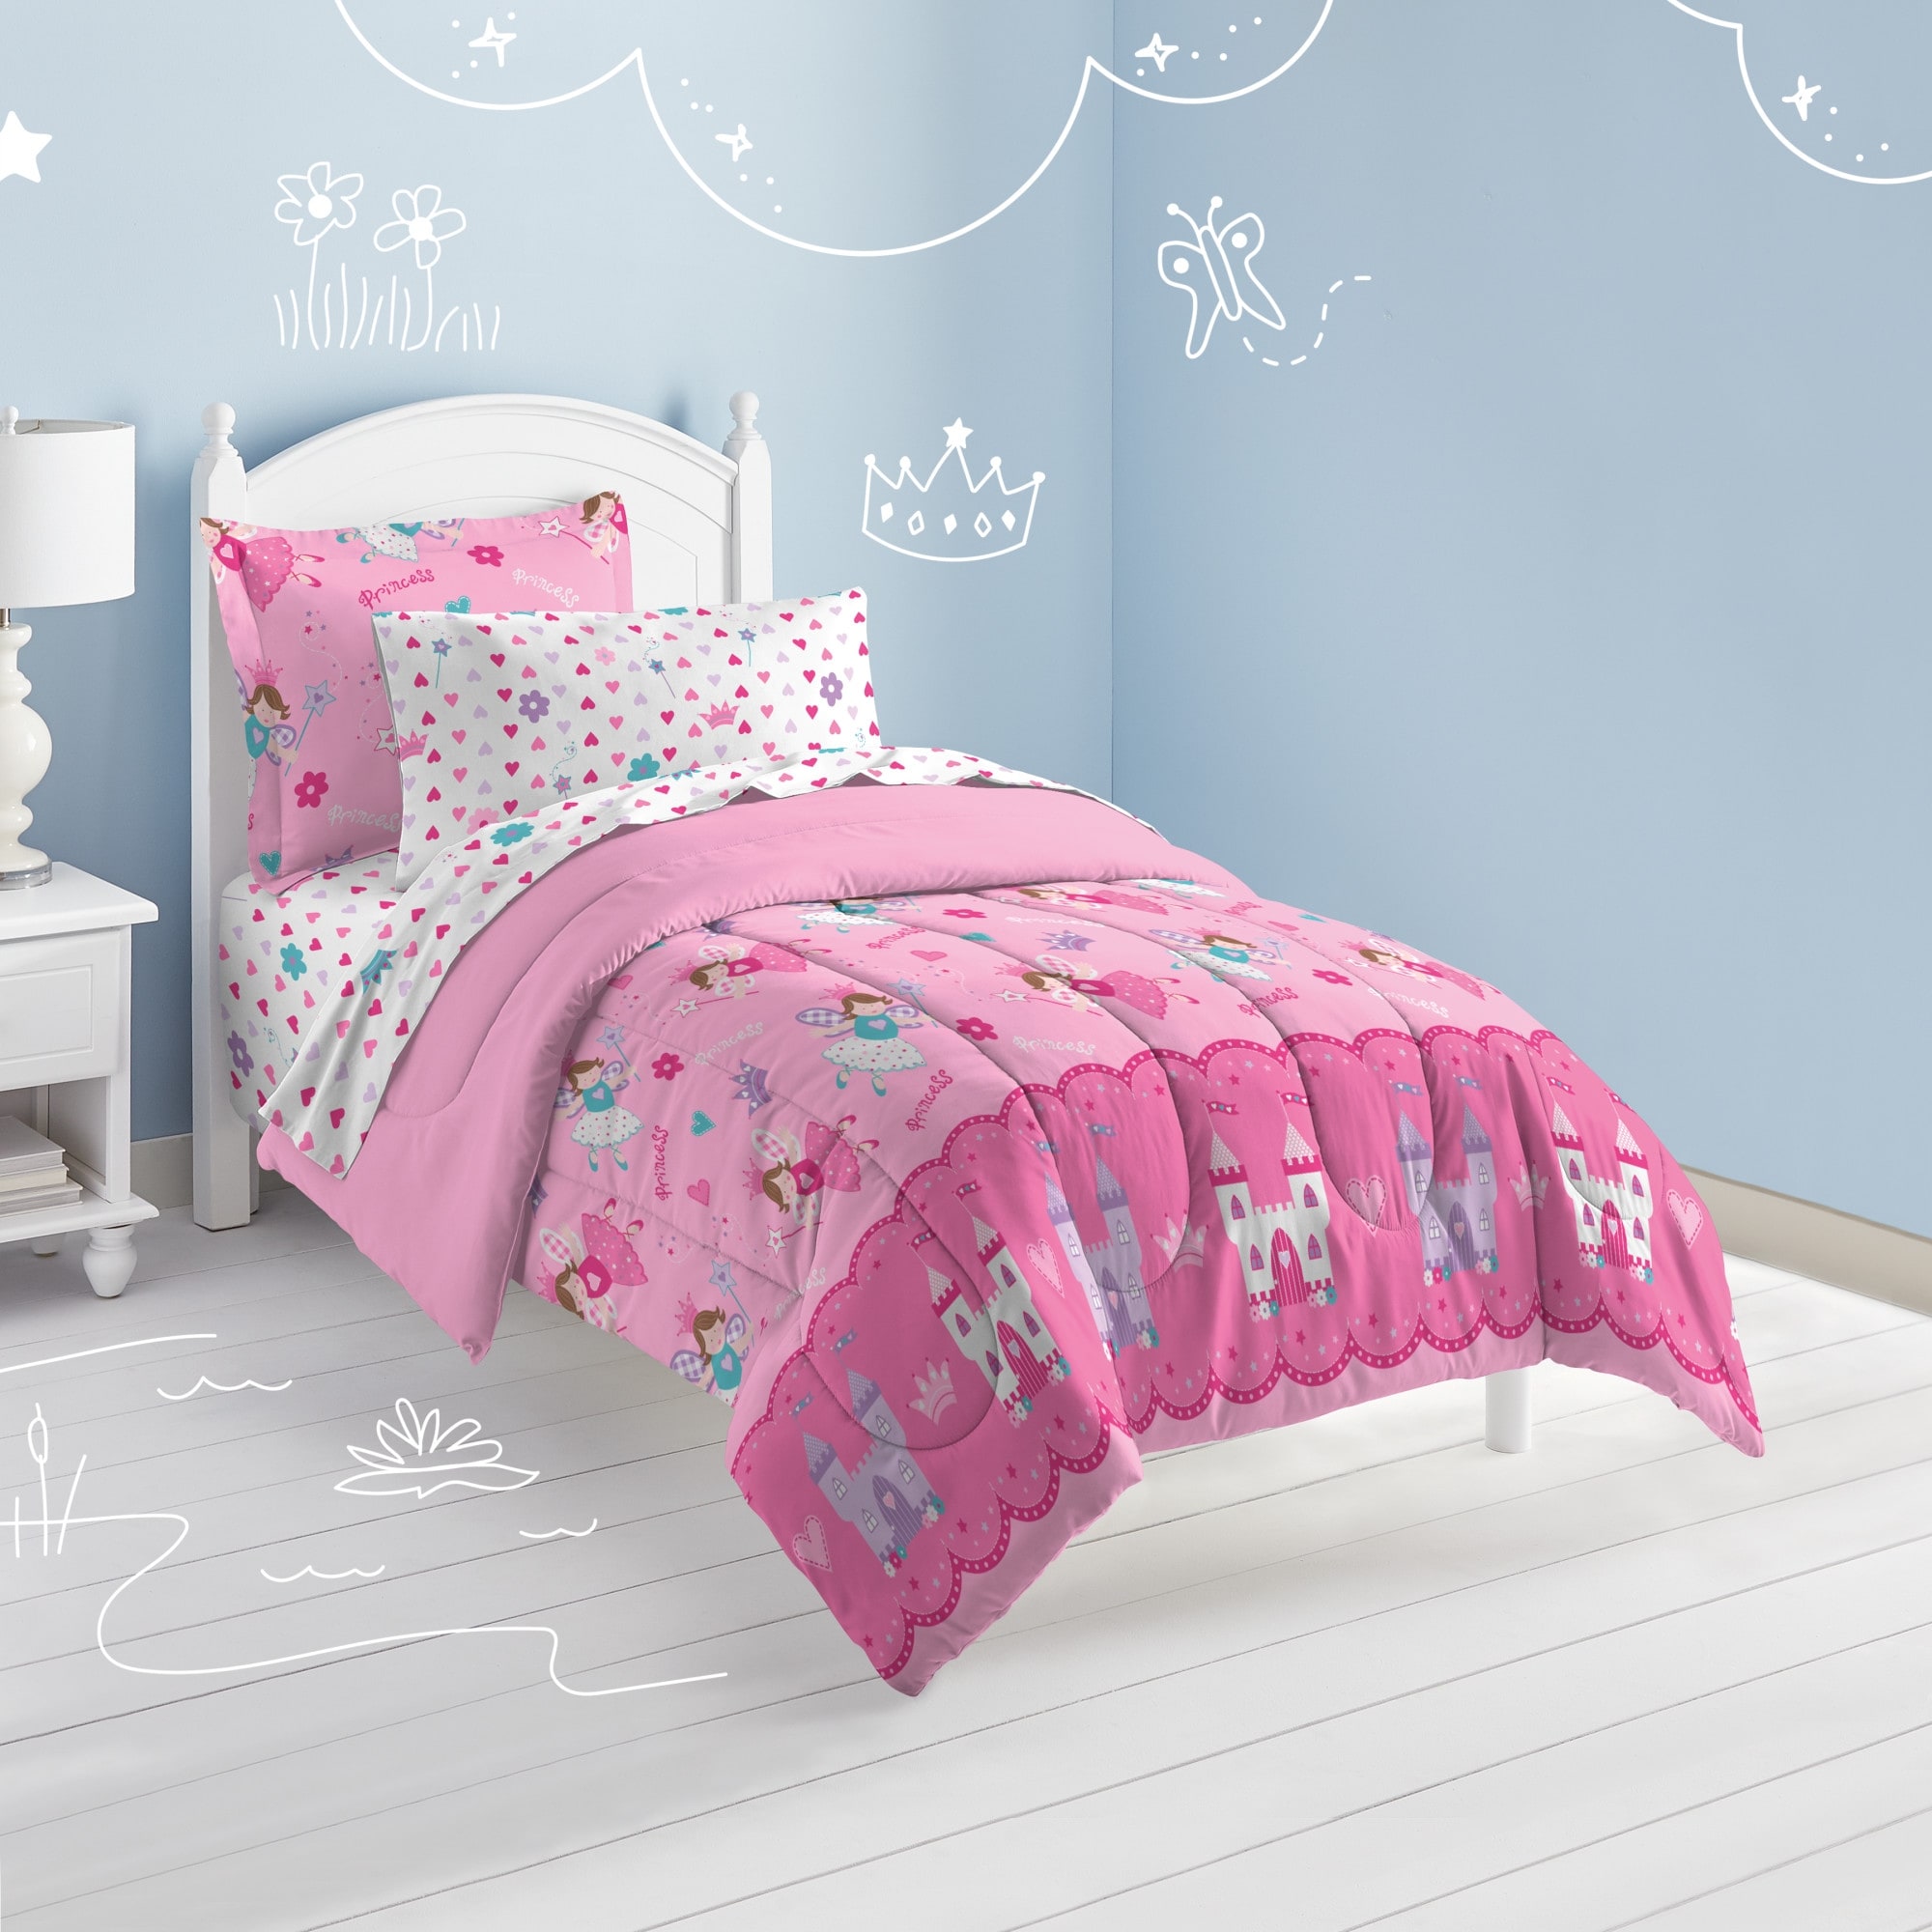 https://ak1.ostkcdn.com/images/products/is/images/direct/e554d94ea9813cbd0b2c578f5c5a2ce39a3729df/Dream-Factory-Magical-Princess-4-piece-Toddler-Comforter-Set.jpg